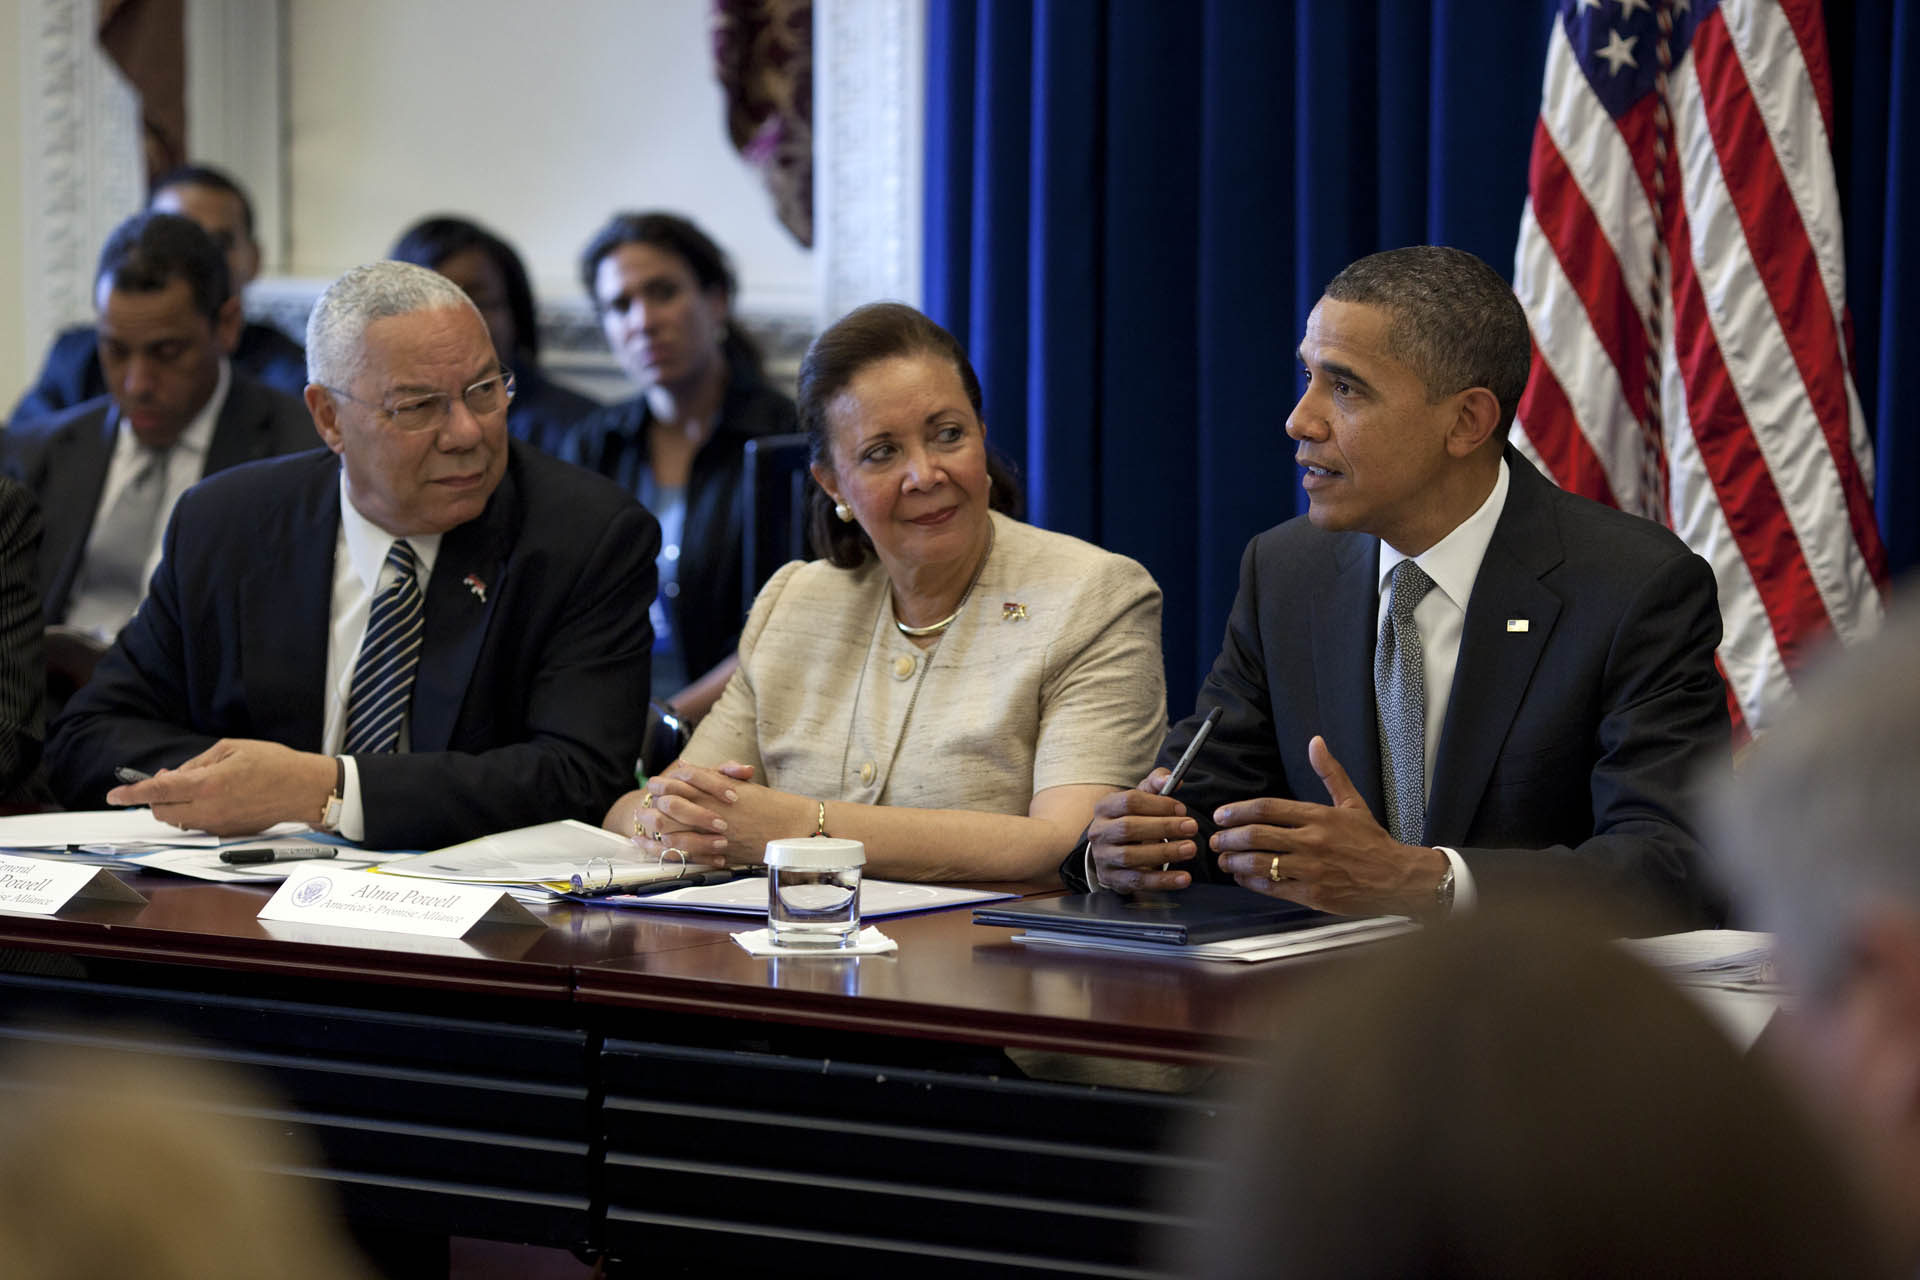 President Barack Obama Hosts an Education Roundtable with Alma Powell and General Colin Powell